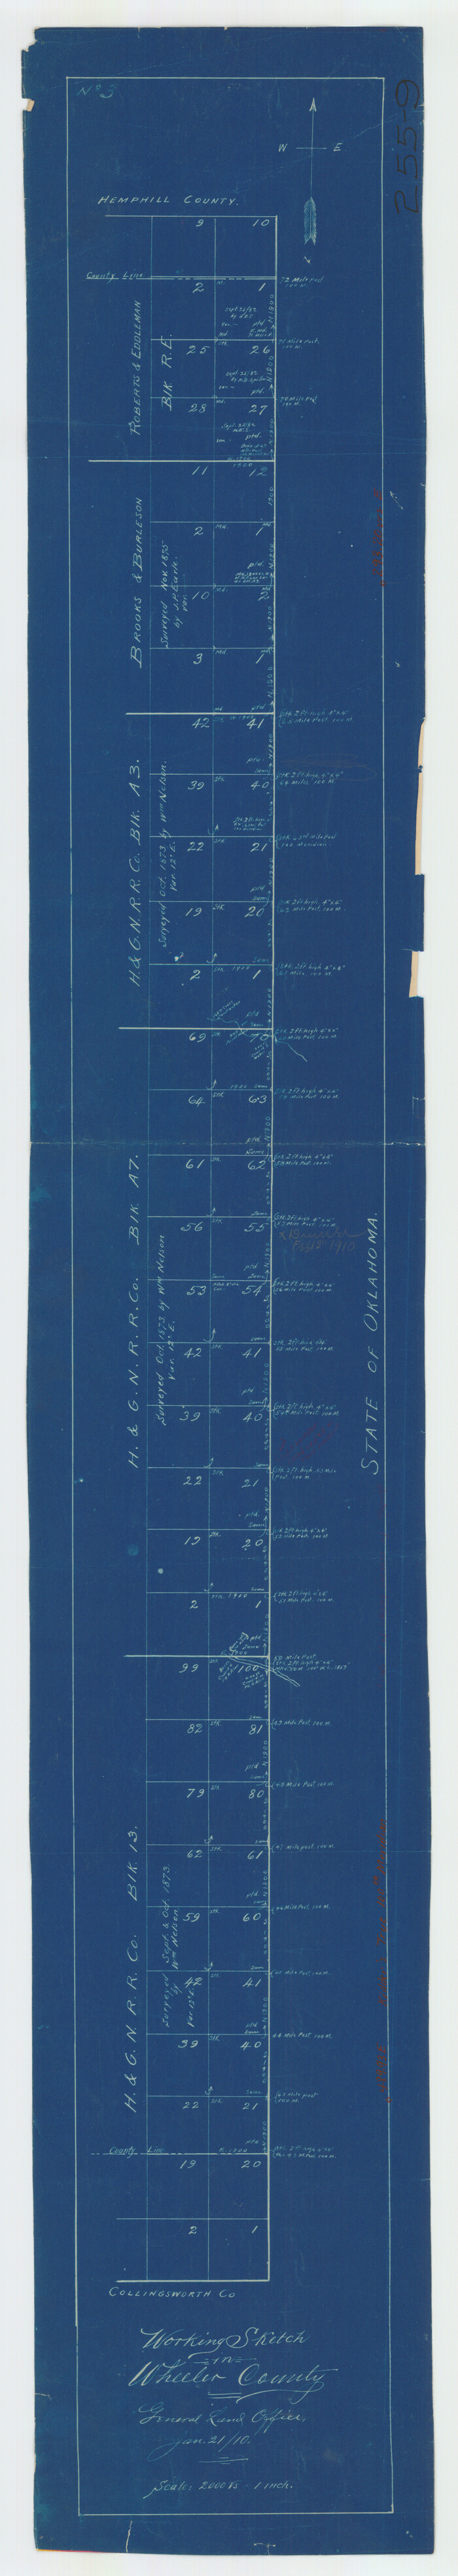 92085, Working Sketch in Wheeler County [showing East line of County along border with Oklahoma], Twichell Survey Records